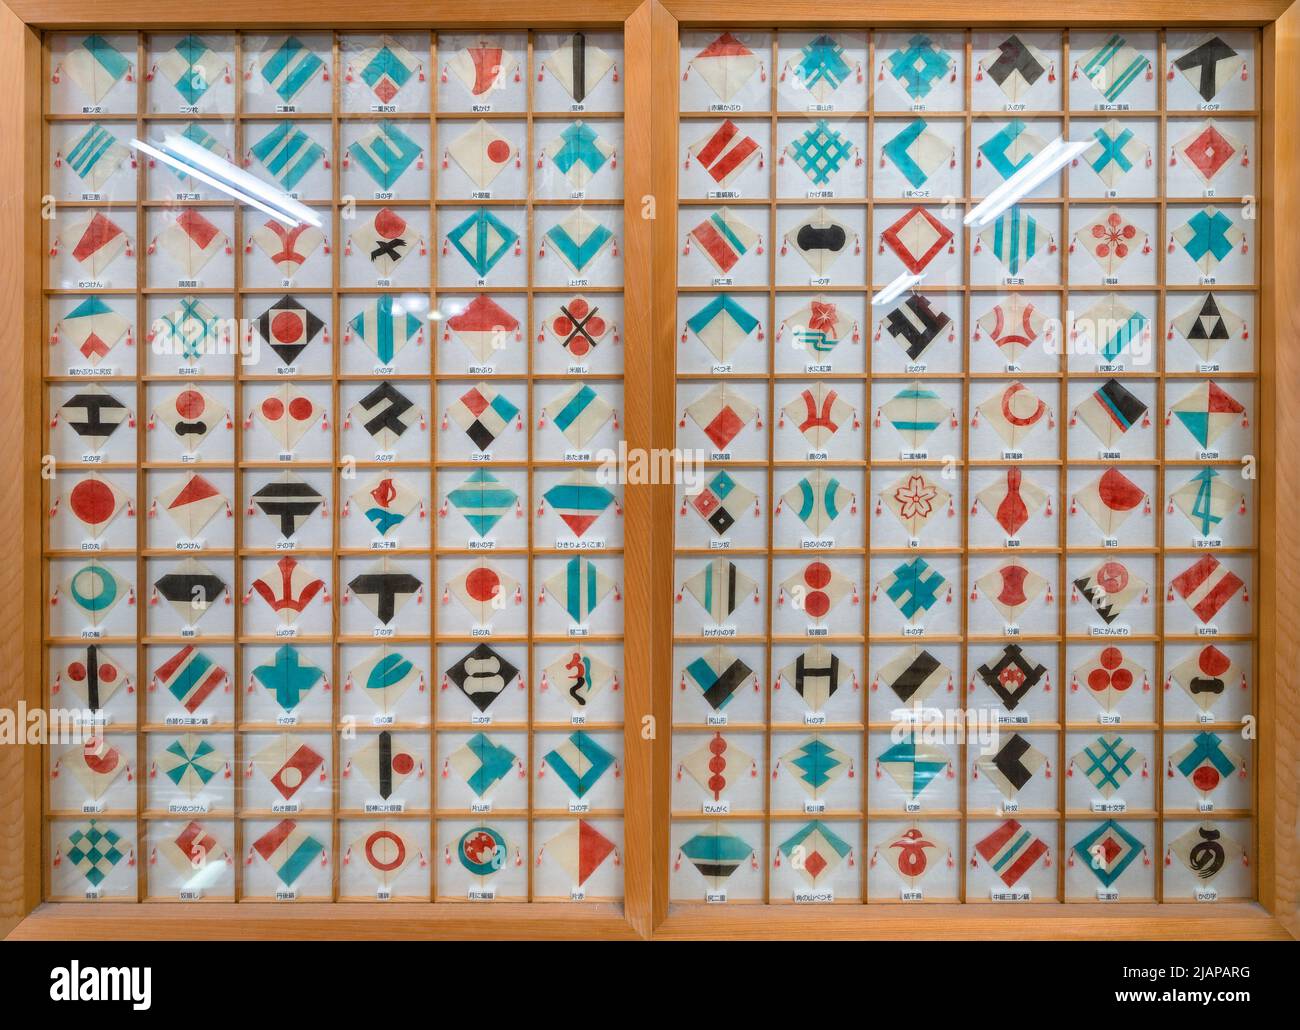 nagasaki, kyushu - december 14 2021: Miniatures in a wooden frame depicting all the designs of the traditional handmade Japanese hata kites exhibited Stock Photo